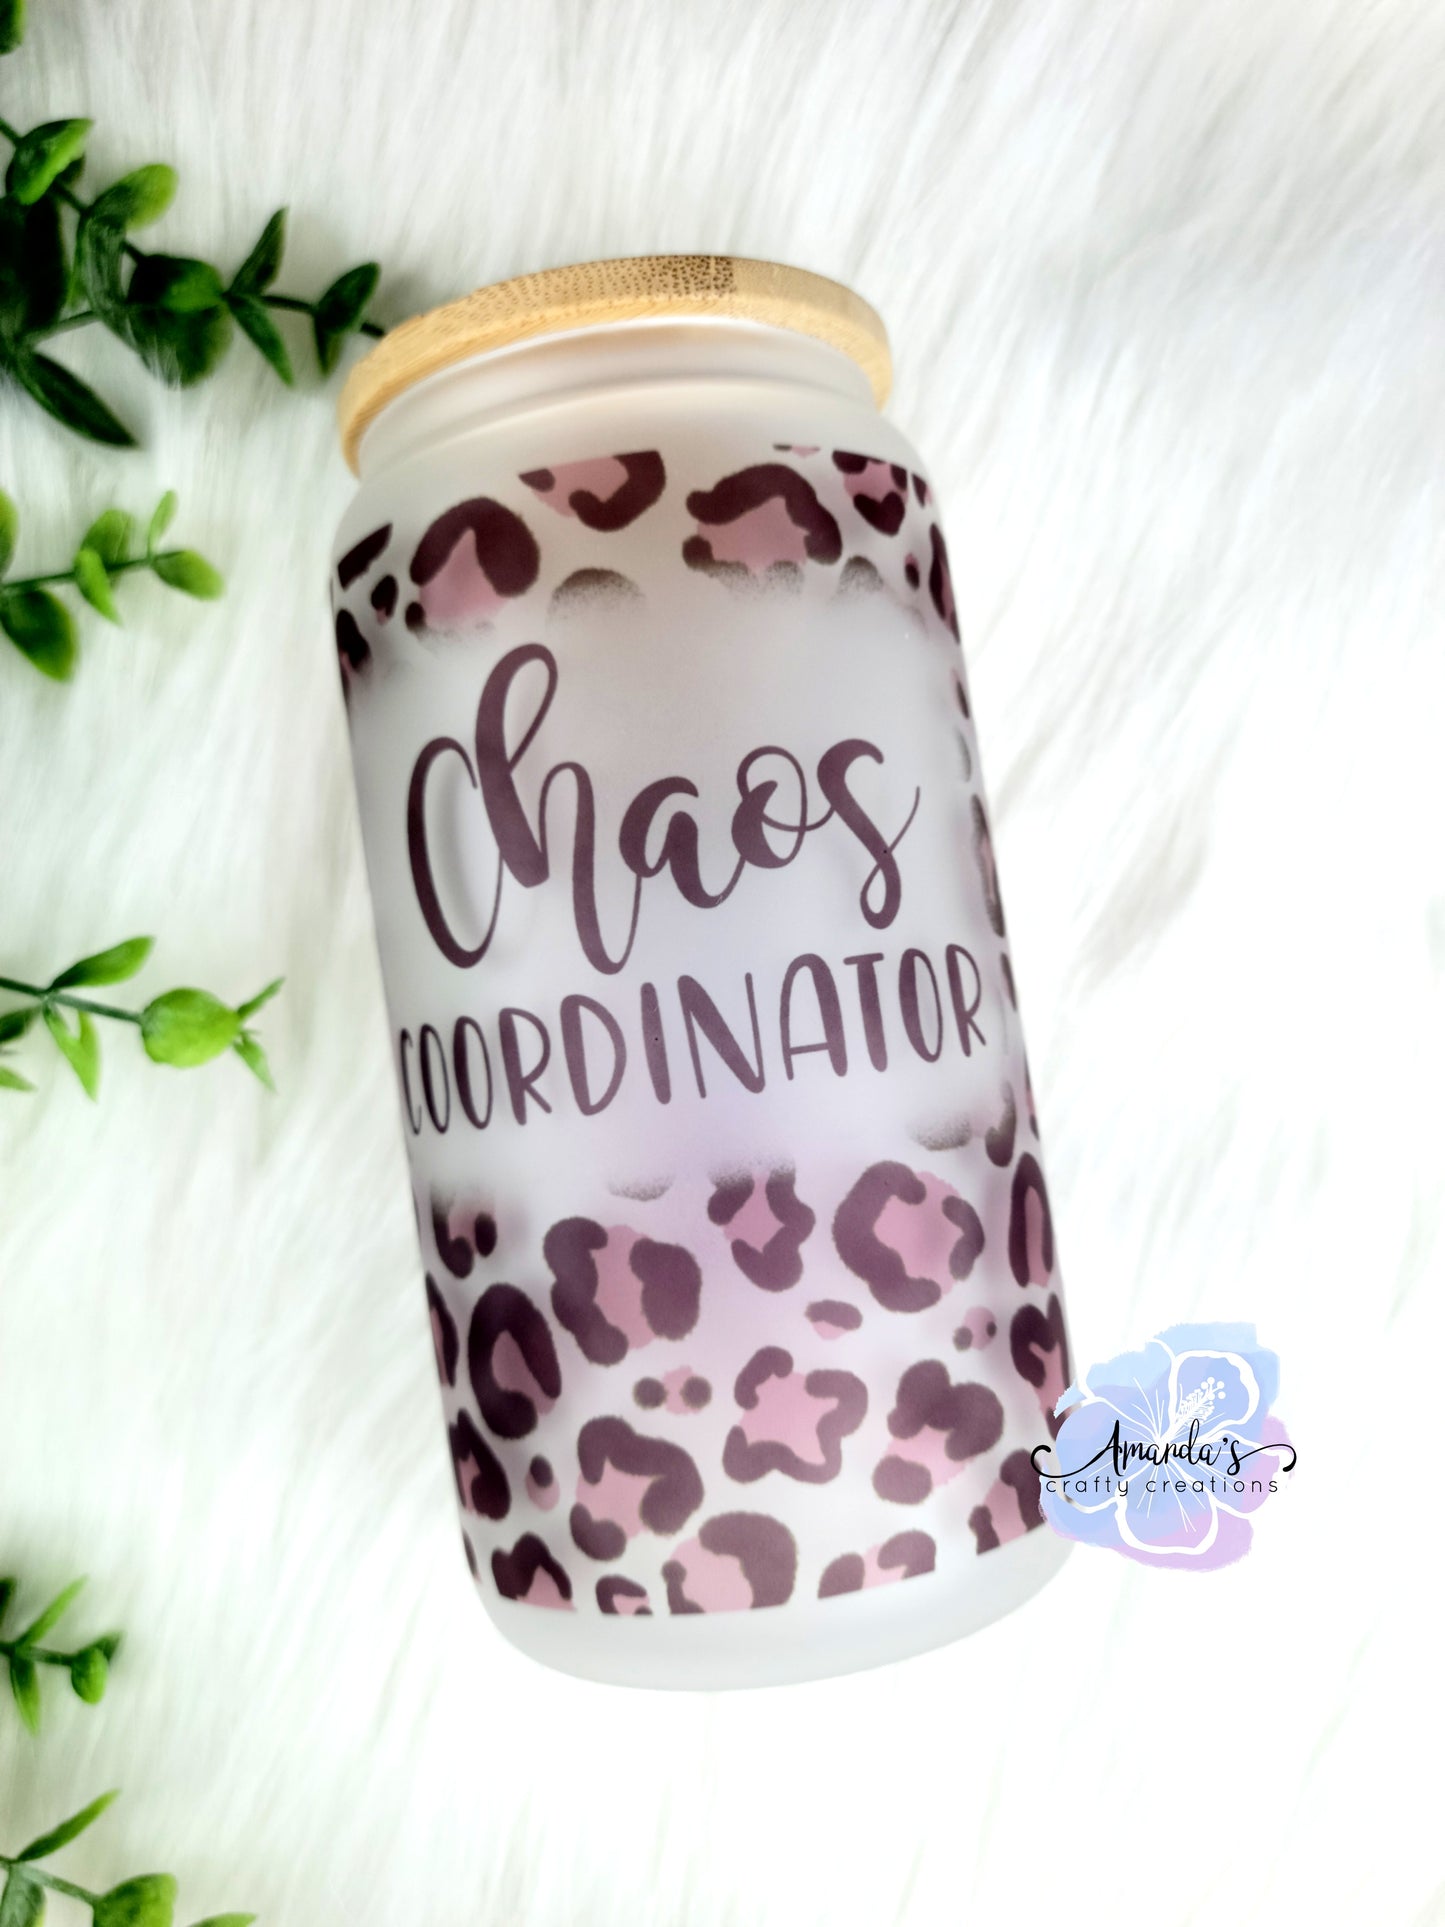 "Chaos Coordinator" rose leopard print 16 oz glass can cup, beer can cup, clear or frosted, glass can beer cup with bamboo lid and plastic straw